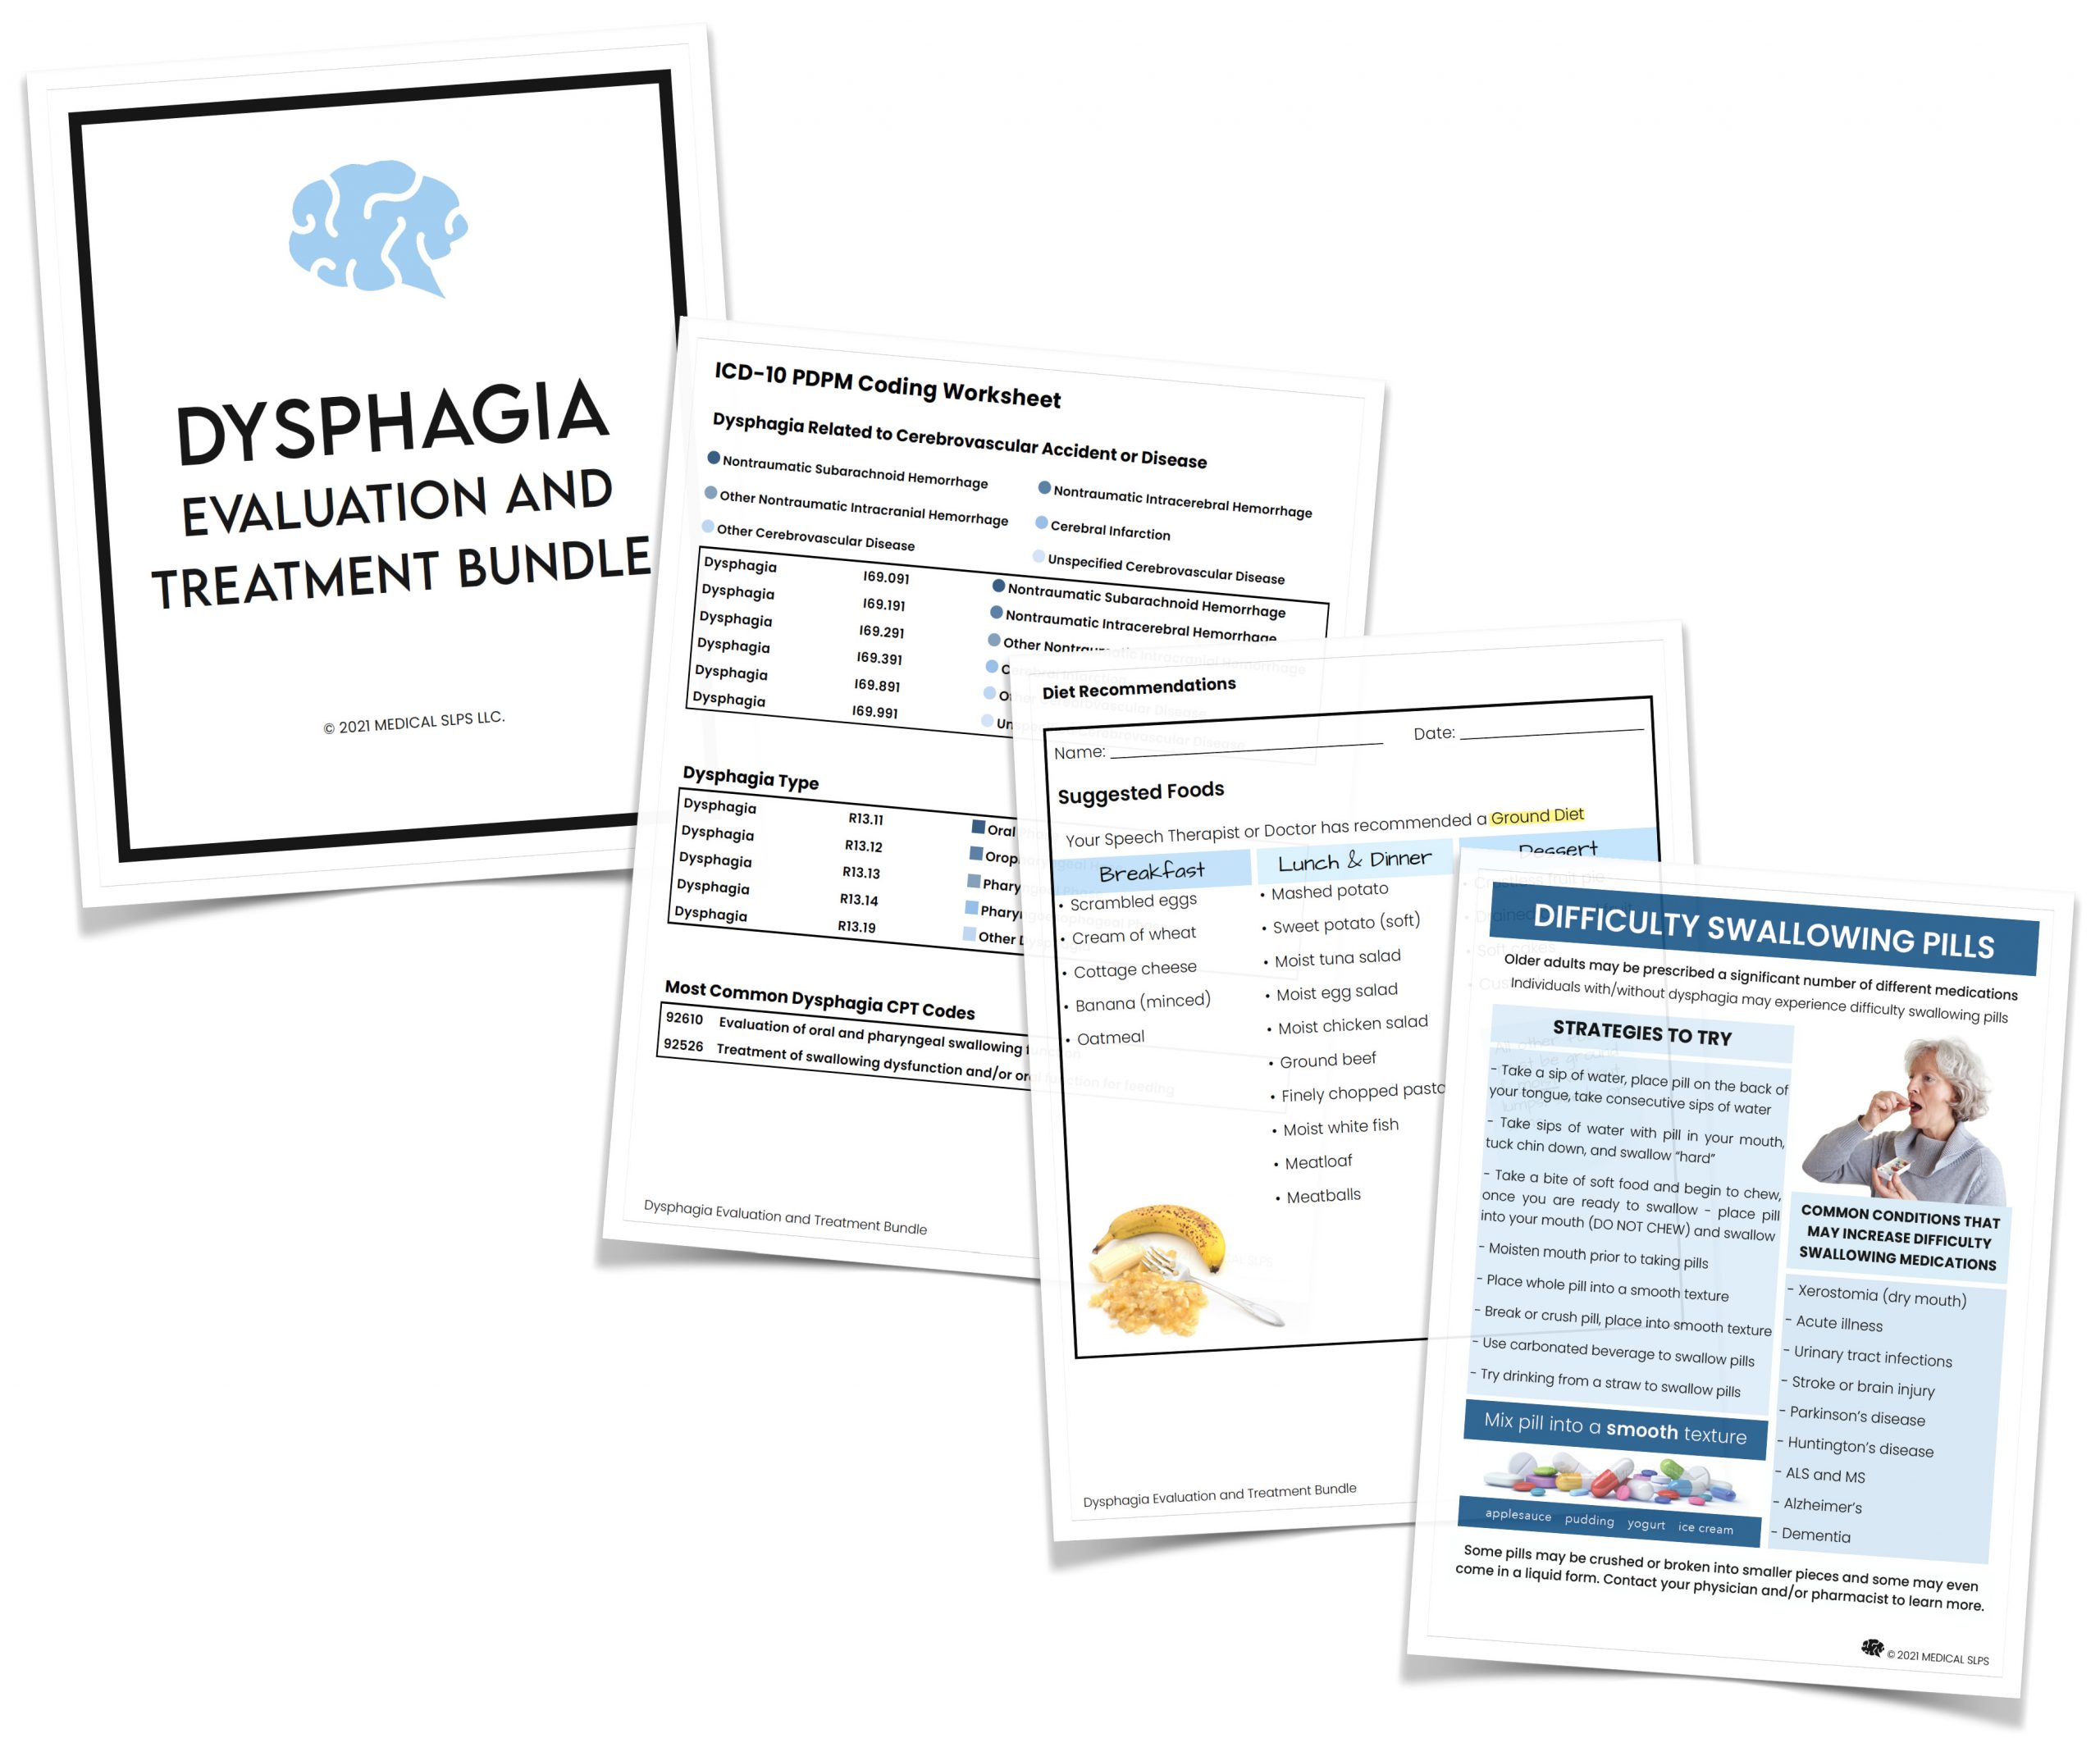 Dysphagia Patient Resources  Nconnect - Product information